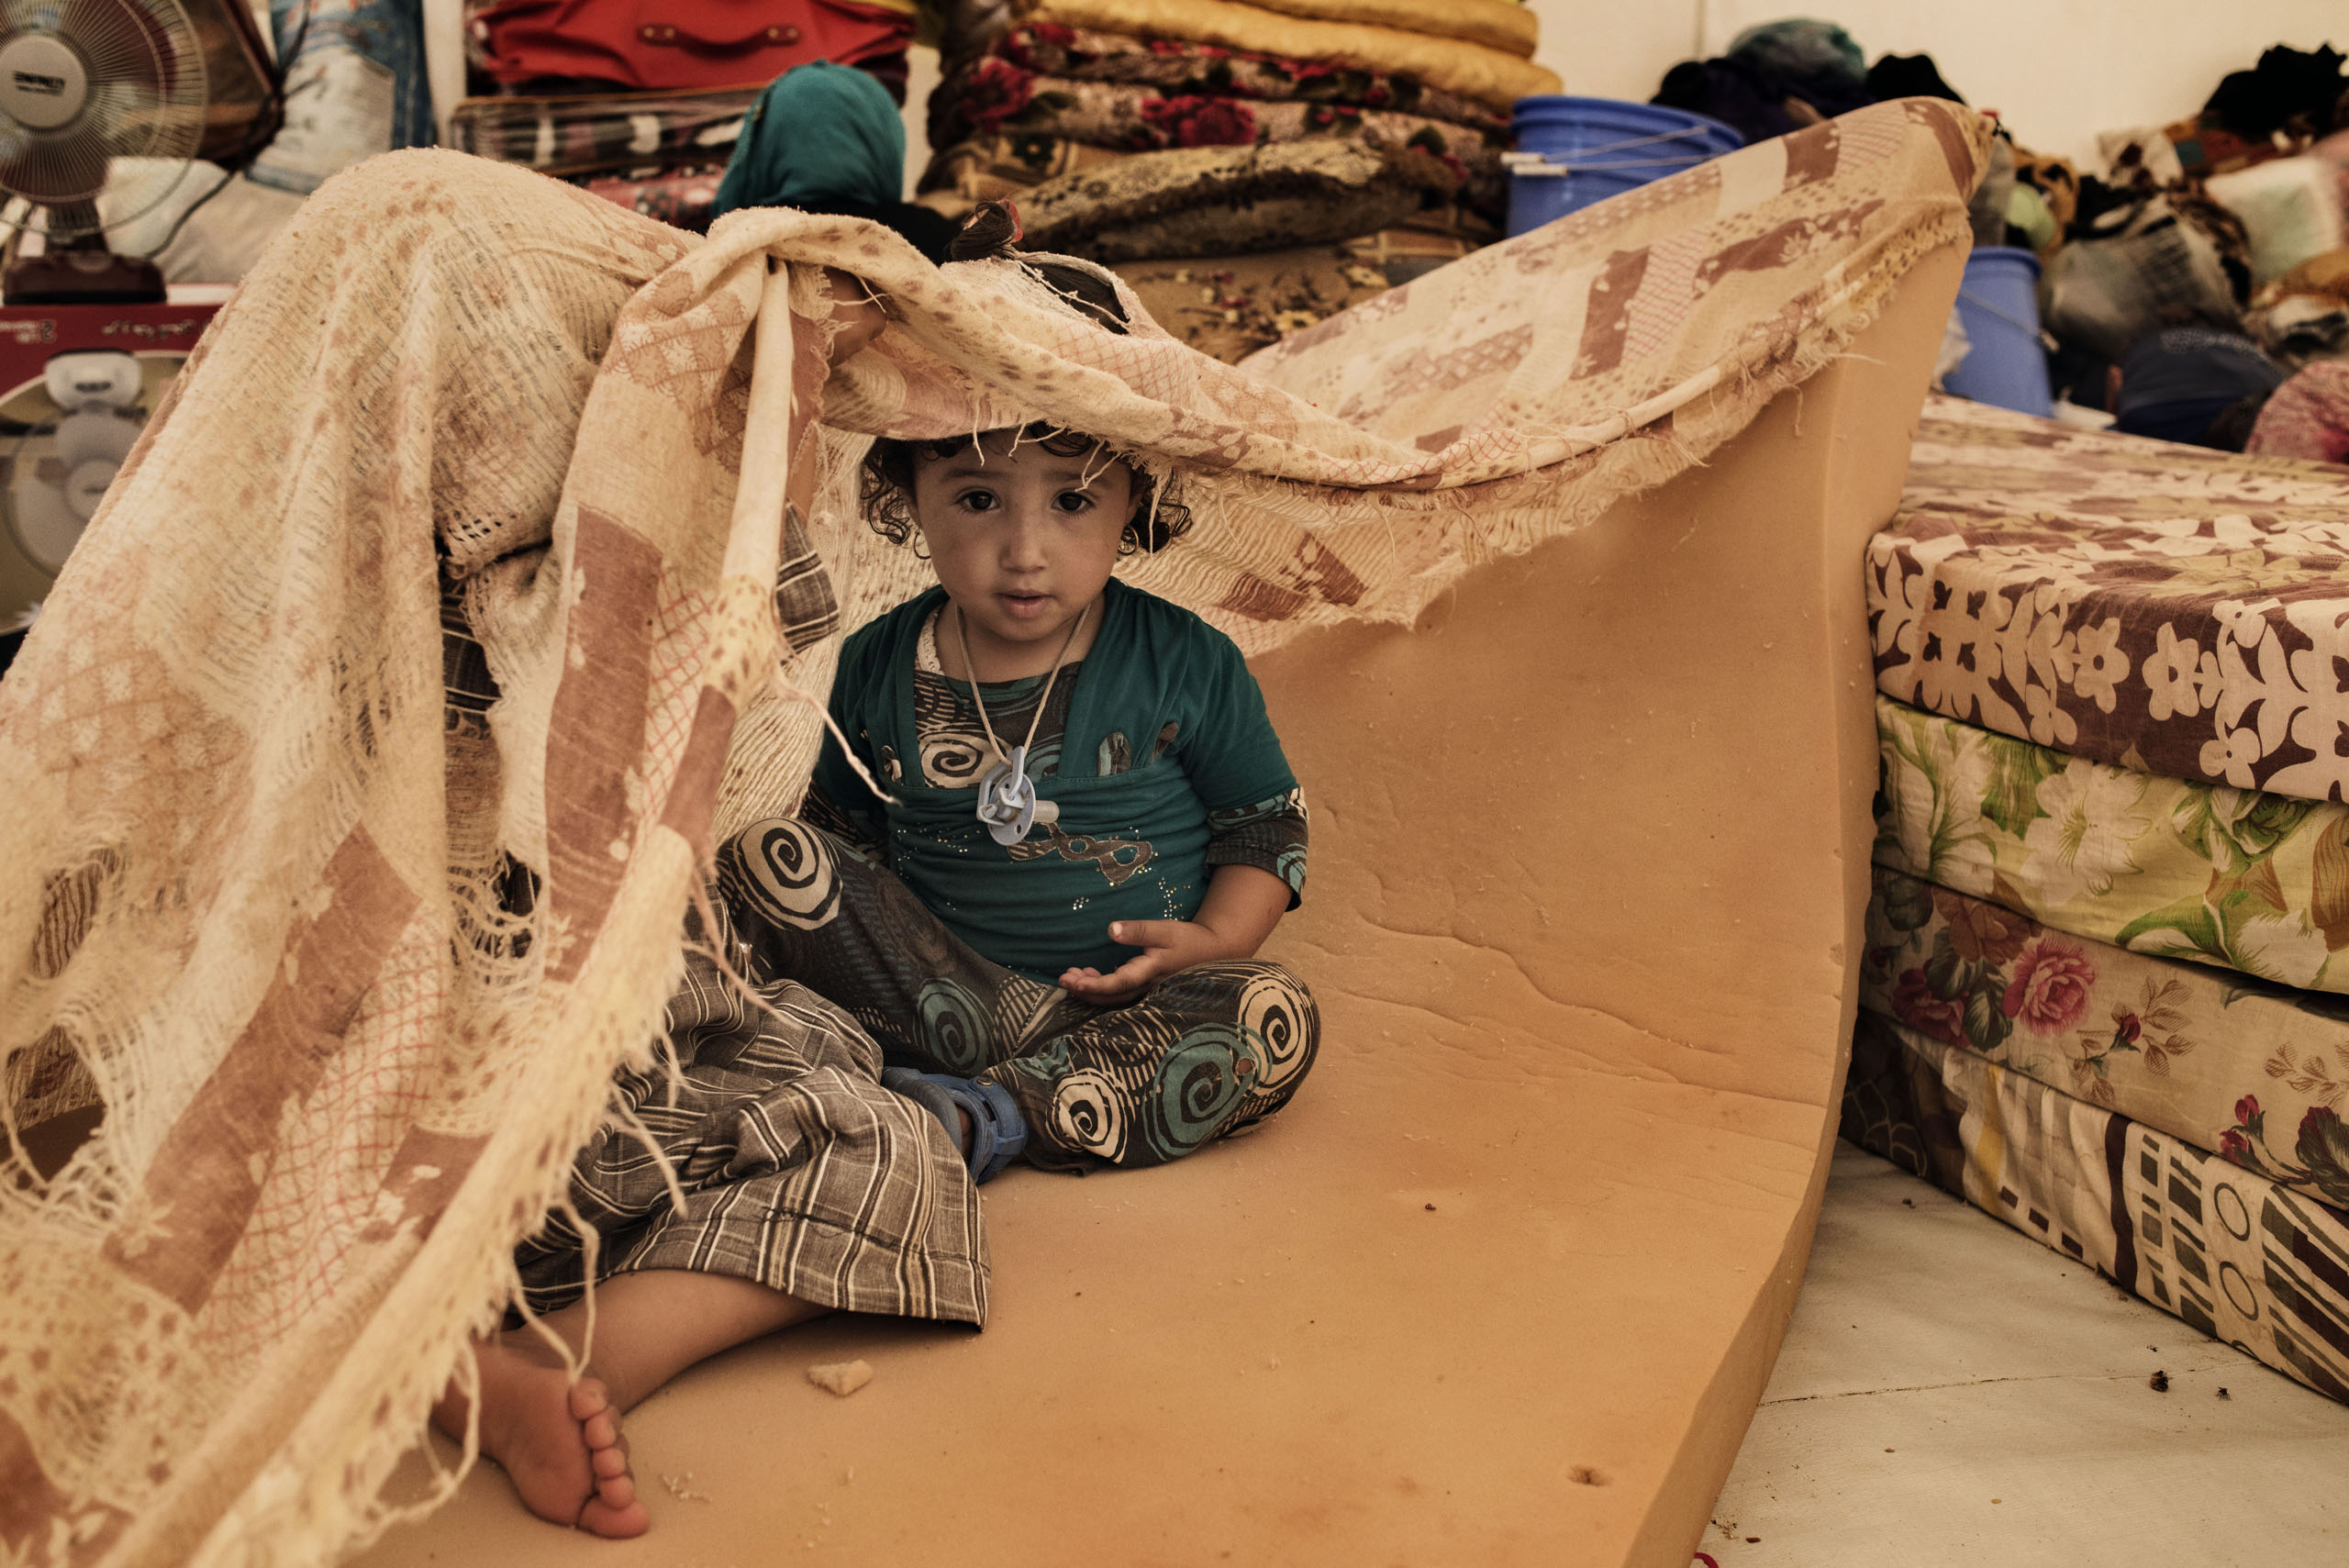 A displaced child sits in a tent in a camp near the Iraqi town of Makhmour, northern Iraq, May 2016.  The United Nations said in April that as many as 30,000 people could be forced to flee  instability in the Makhmour area, as the Iraqi military pursues an offensive against Islamic State militants in the district.